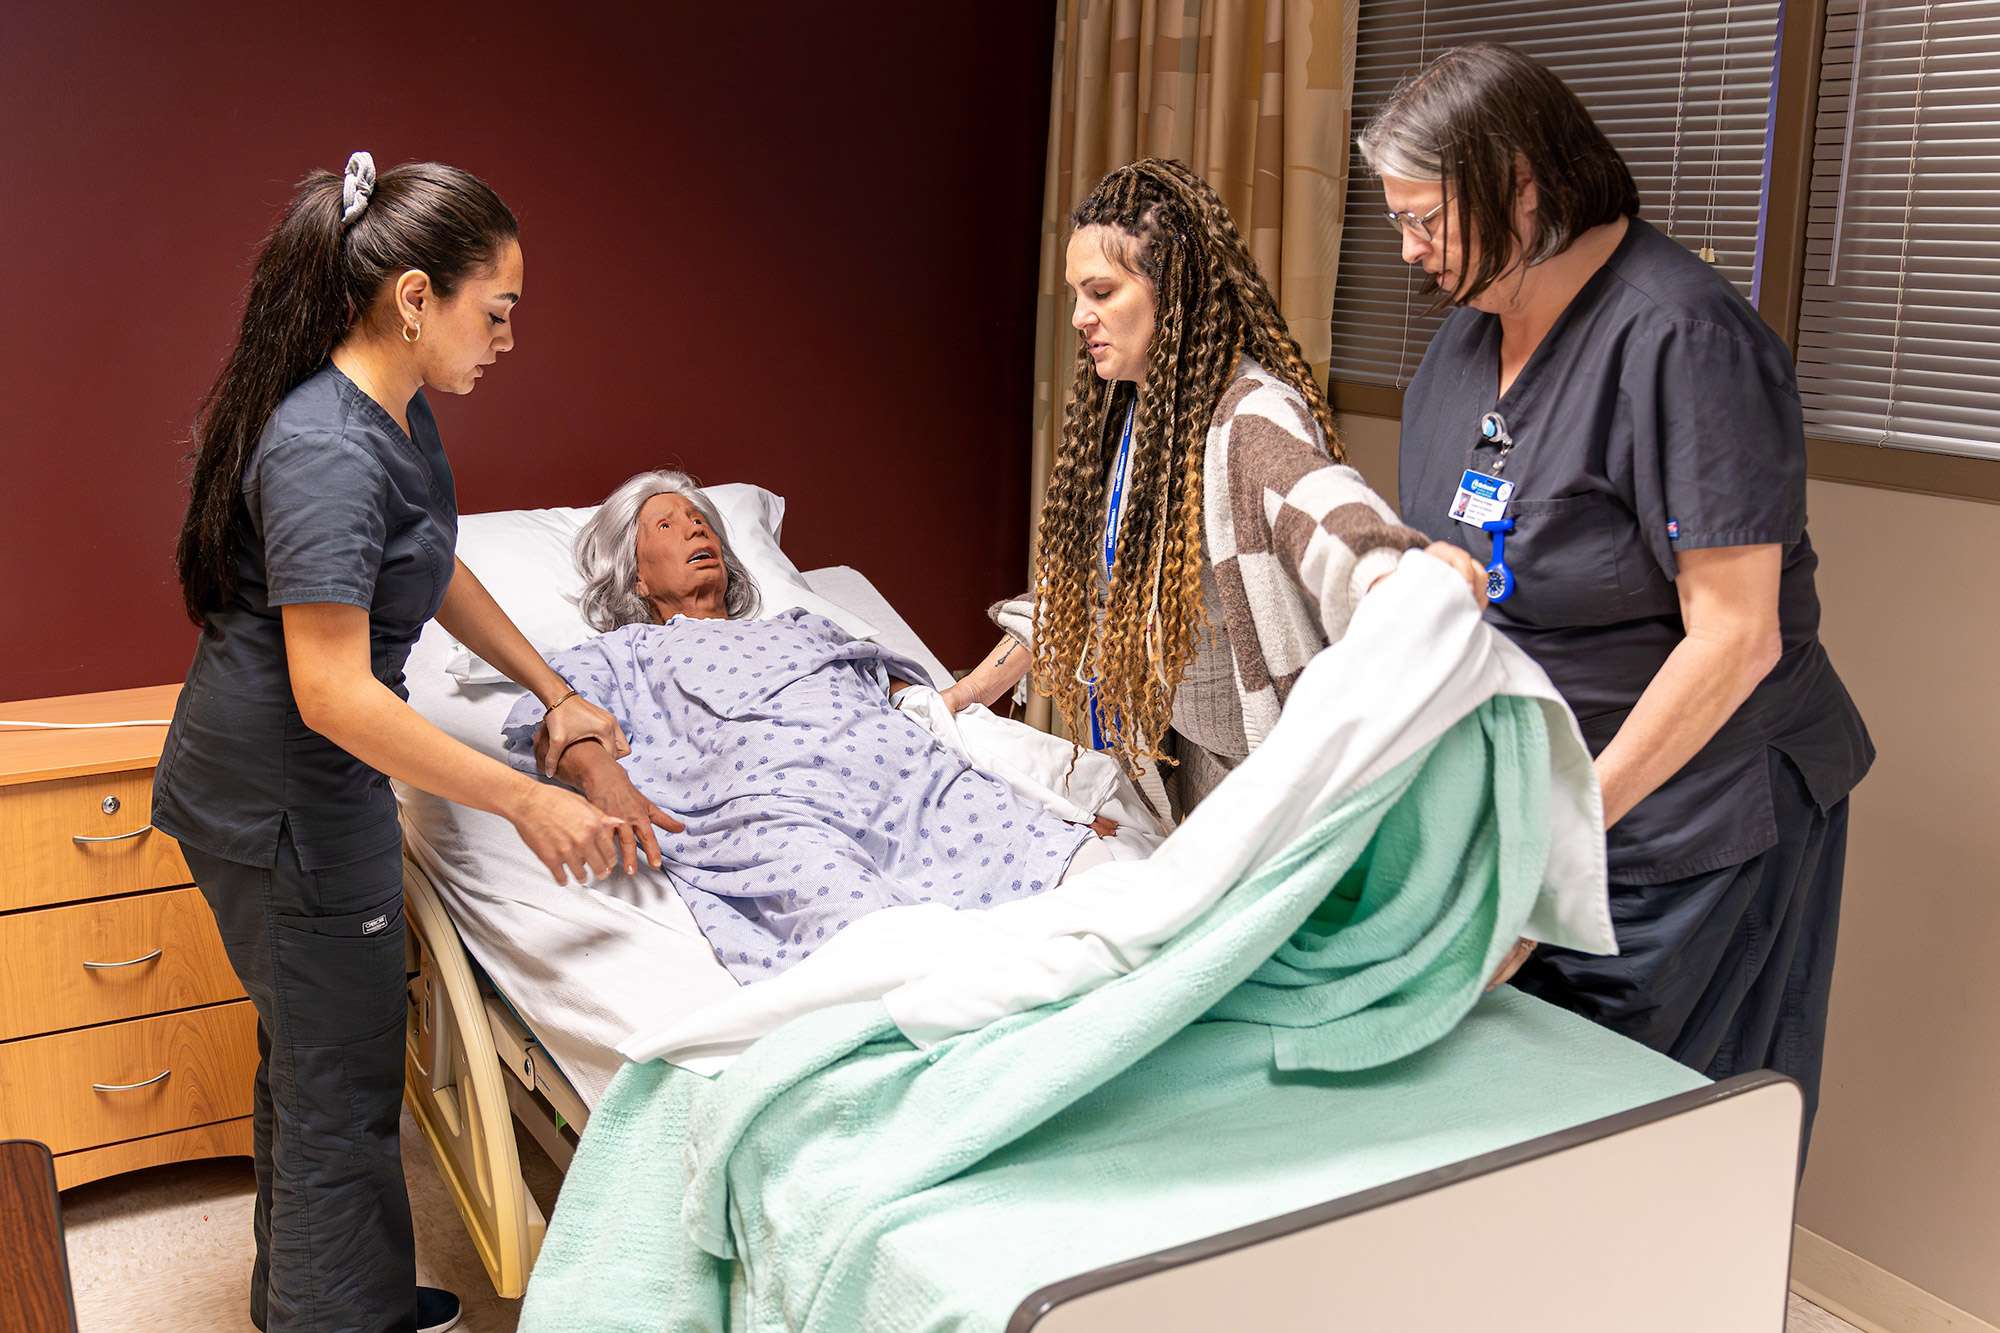 Three certified nursing assistants practice taking vitals using a mannequin and are changing the bedding.